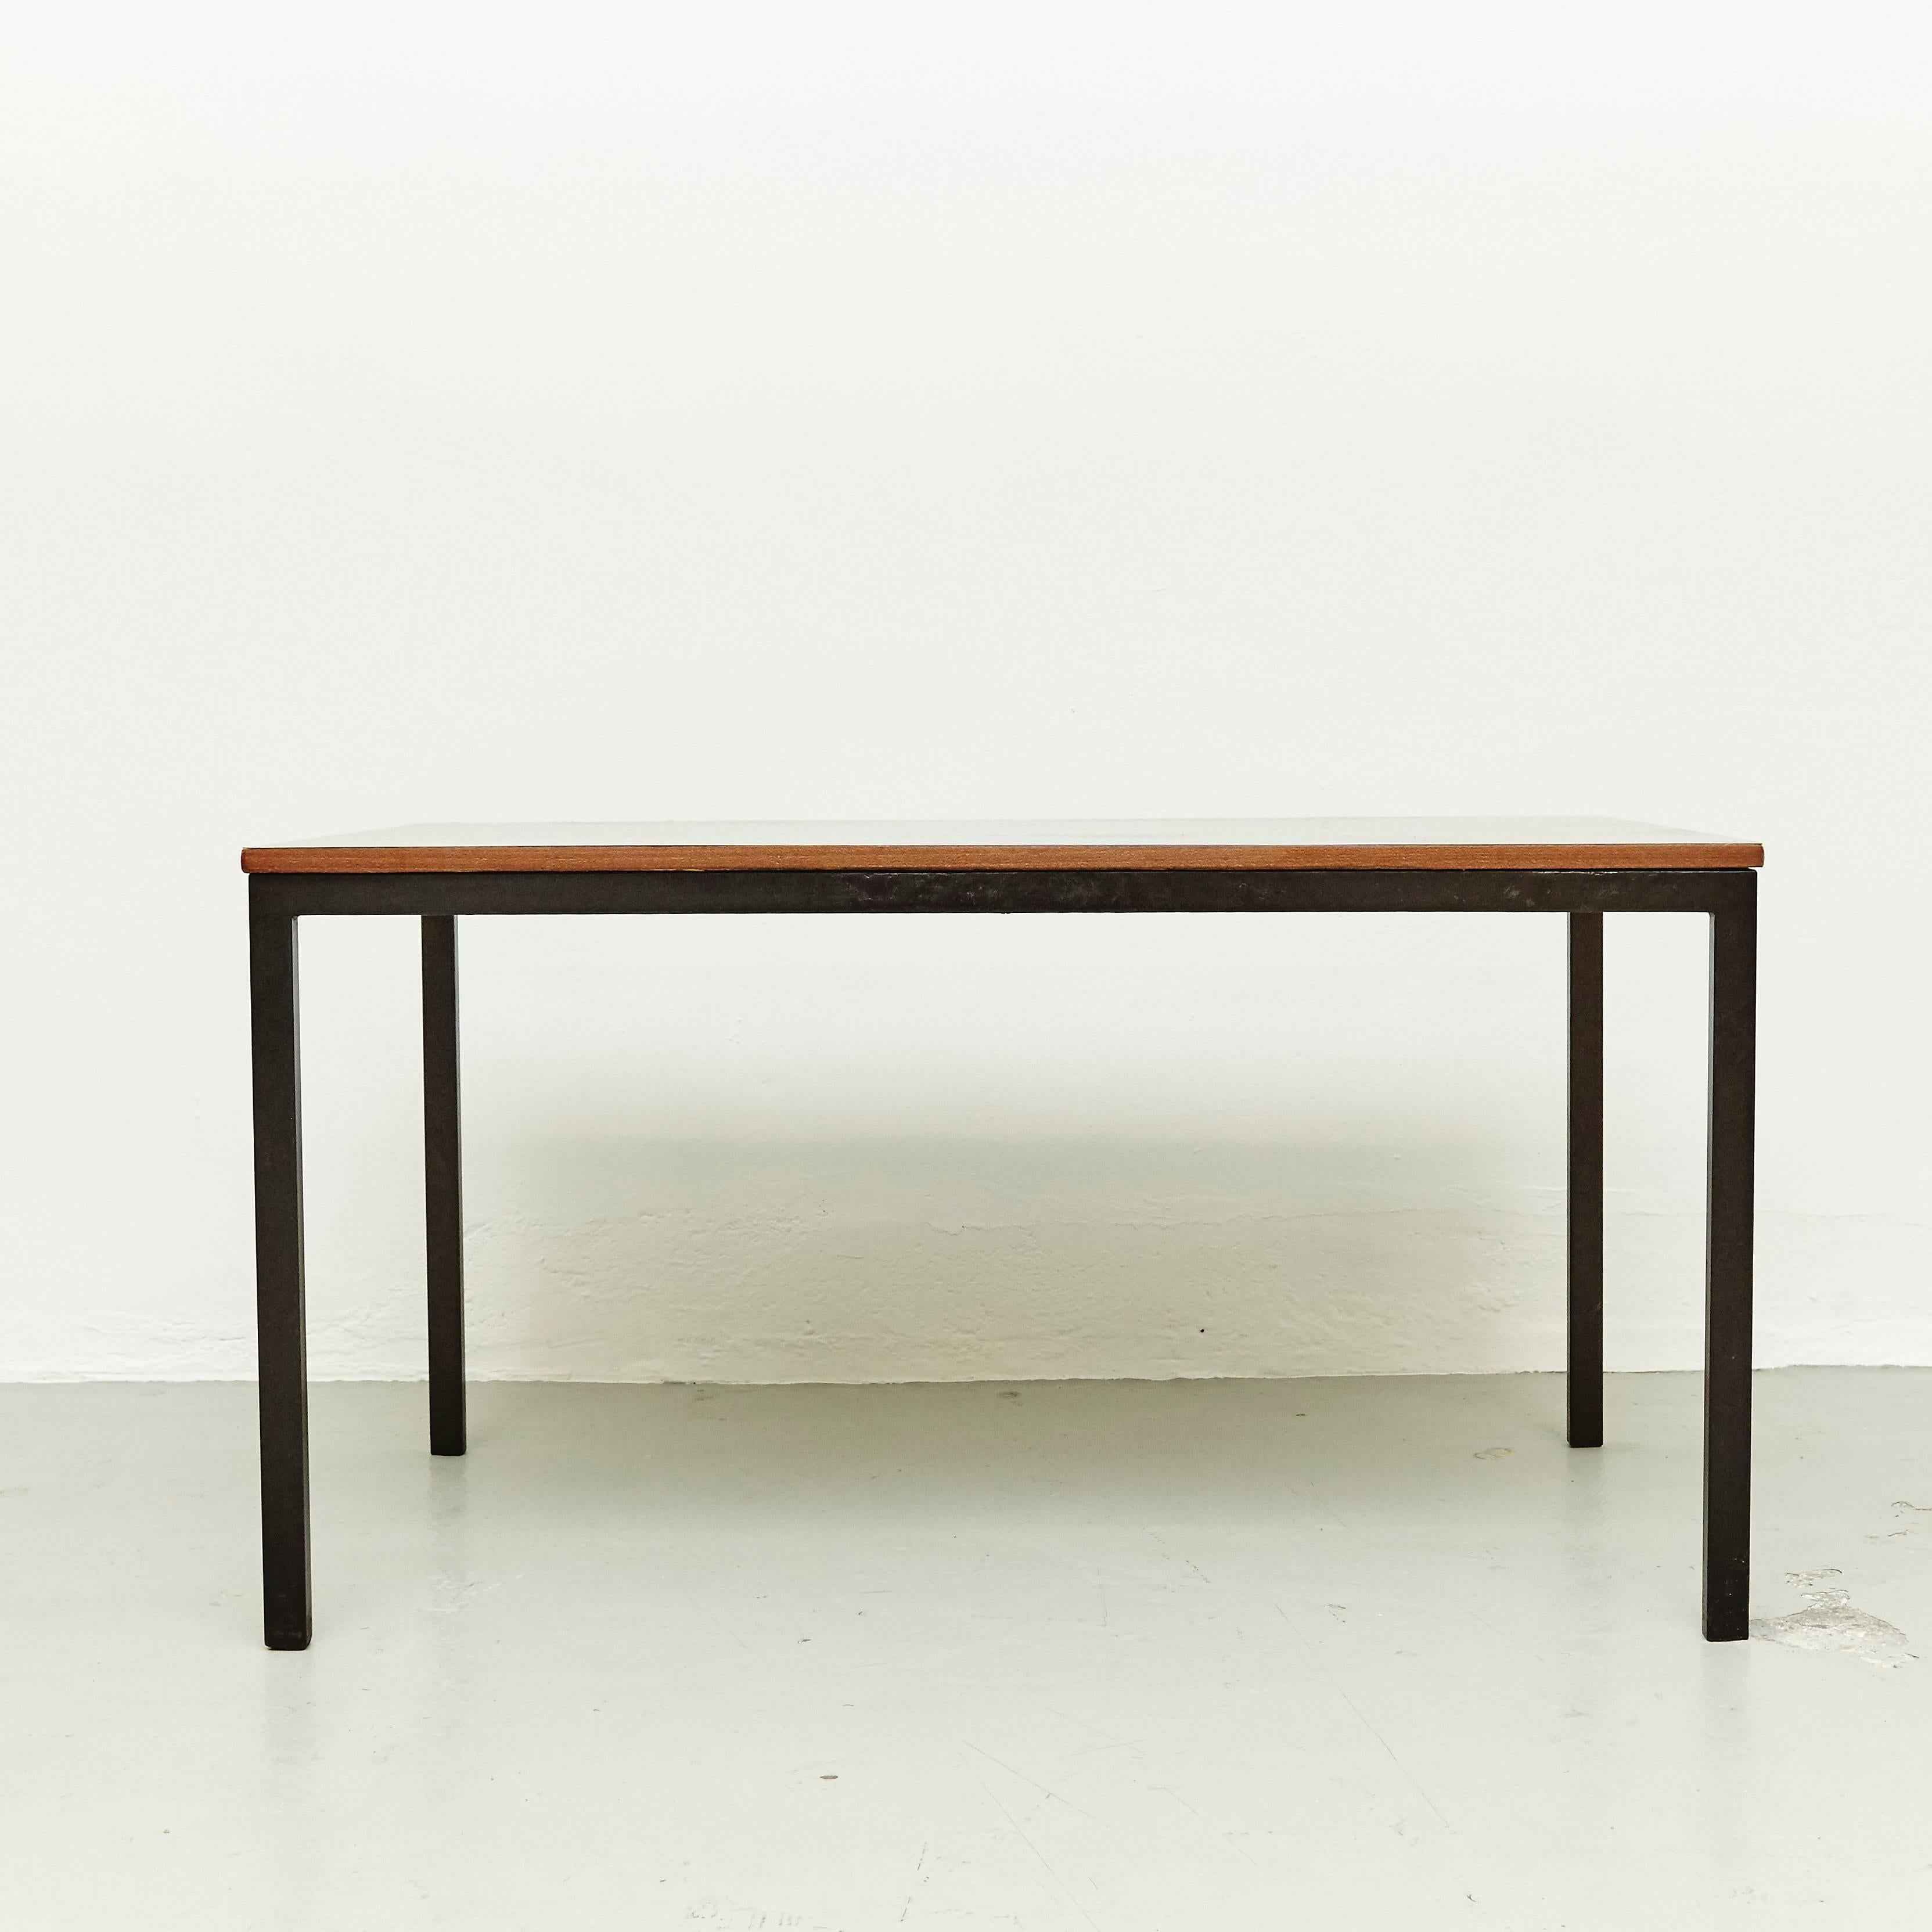 Table designed by Charlotte Perriand, circa 1950.

Wood, metal frame legs.

Provenance: Cansado, Mauritania (Africa).

In good original condition, with minor wear consistent with age and use, preserving a beautiful patina. 

Charlotte